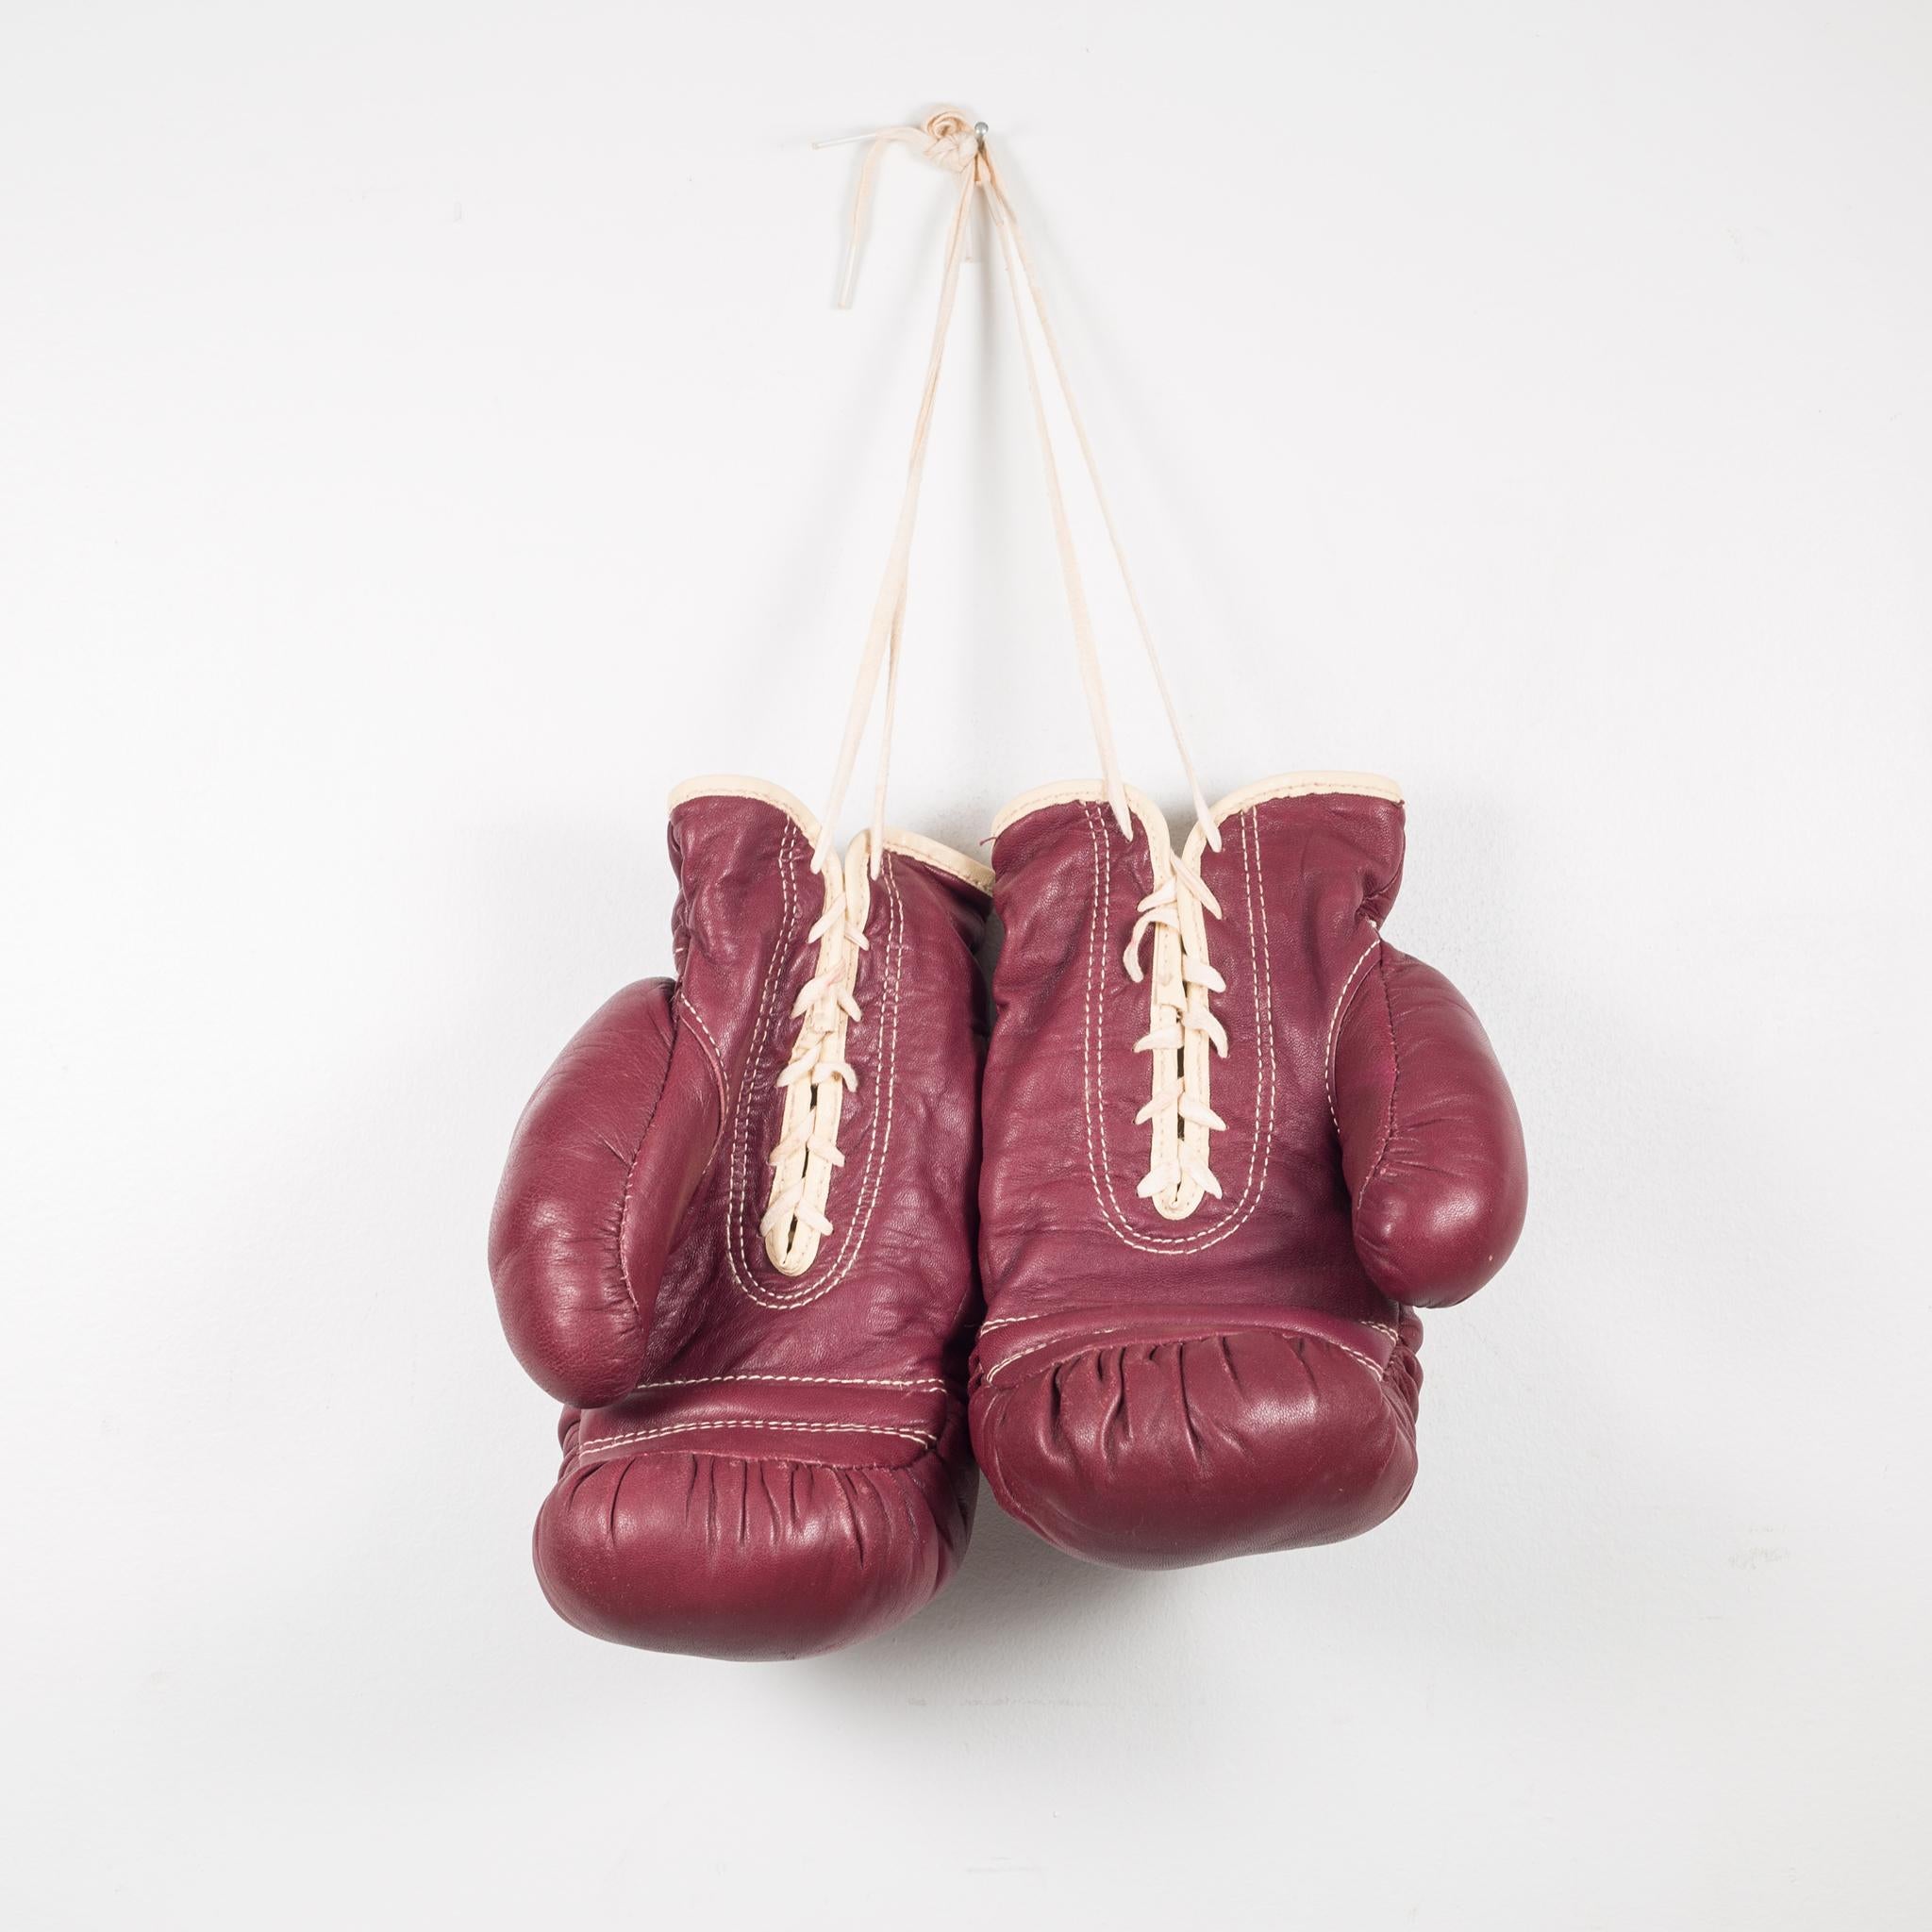 About

Two pairs available. Price is per pair.

These are authentic vintage boxing gloves with reddish, brown leather. Each glove has tan leather piping and laces. The leather is very soft and is good condition. Stamped J.C. Higgins label on